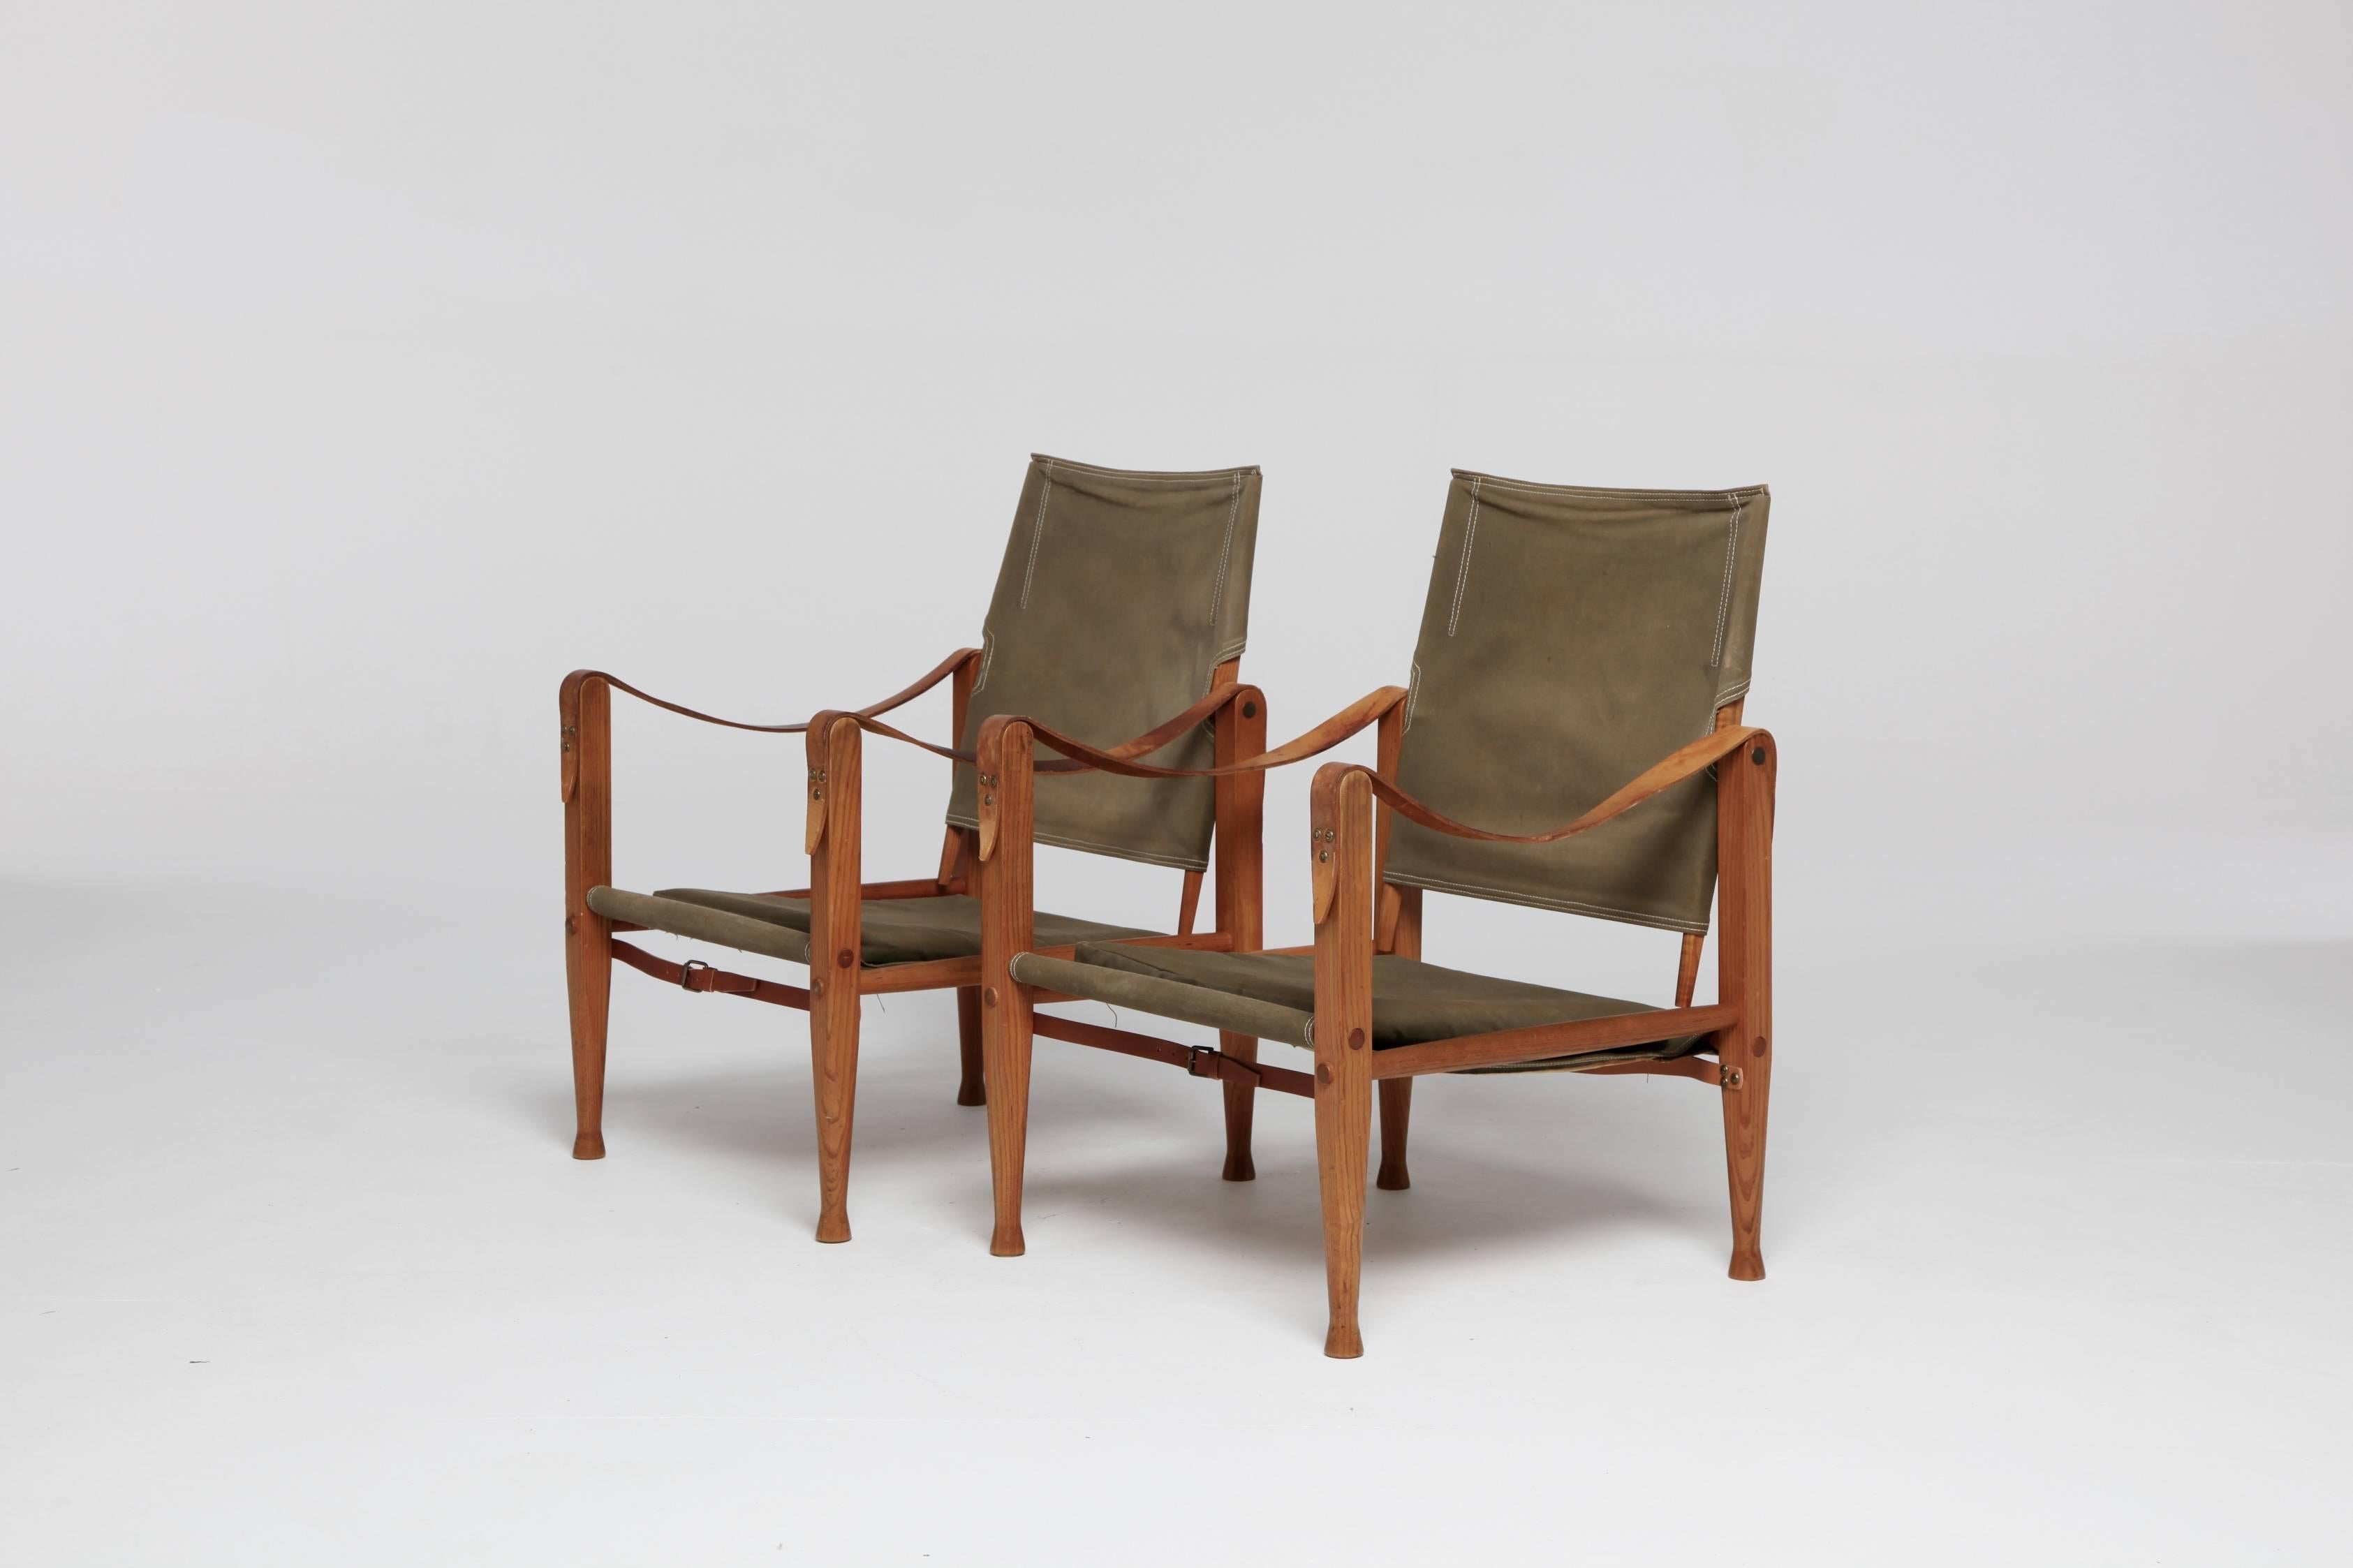 An authentic pair of vintage Kaare Klint safari chairs in original olive / khaki canvas. Designed in 1933 and produced by Rud Rasmussen, Denmark, with labels intact.

Fast worldwide shipping to your door. The chairs will need to be disassembled